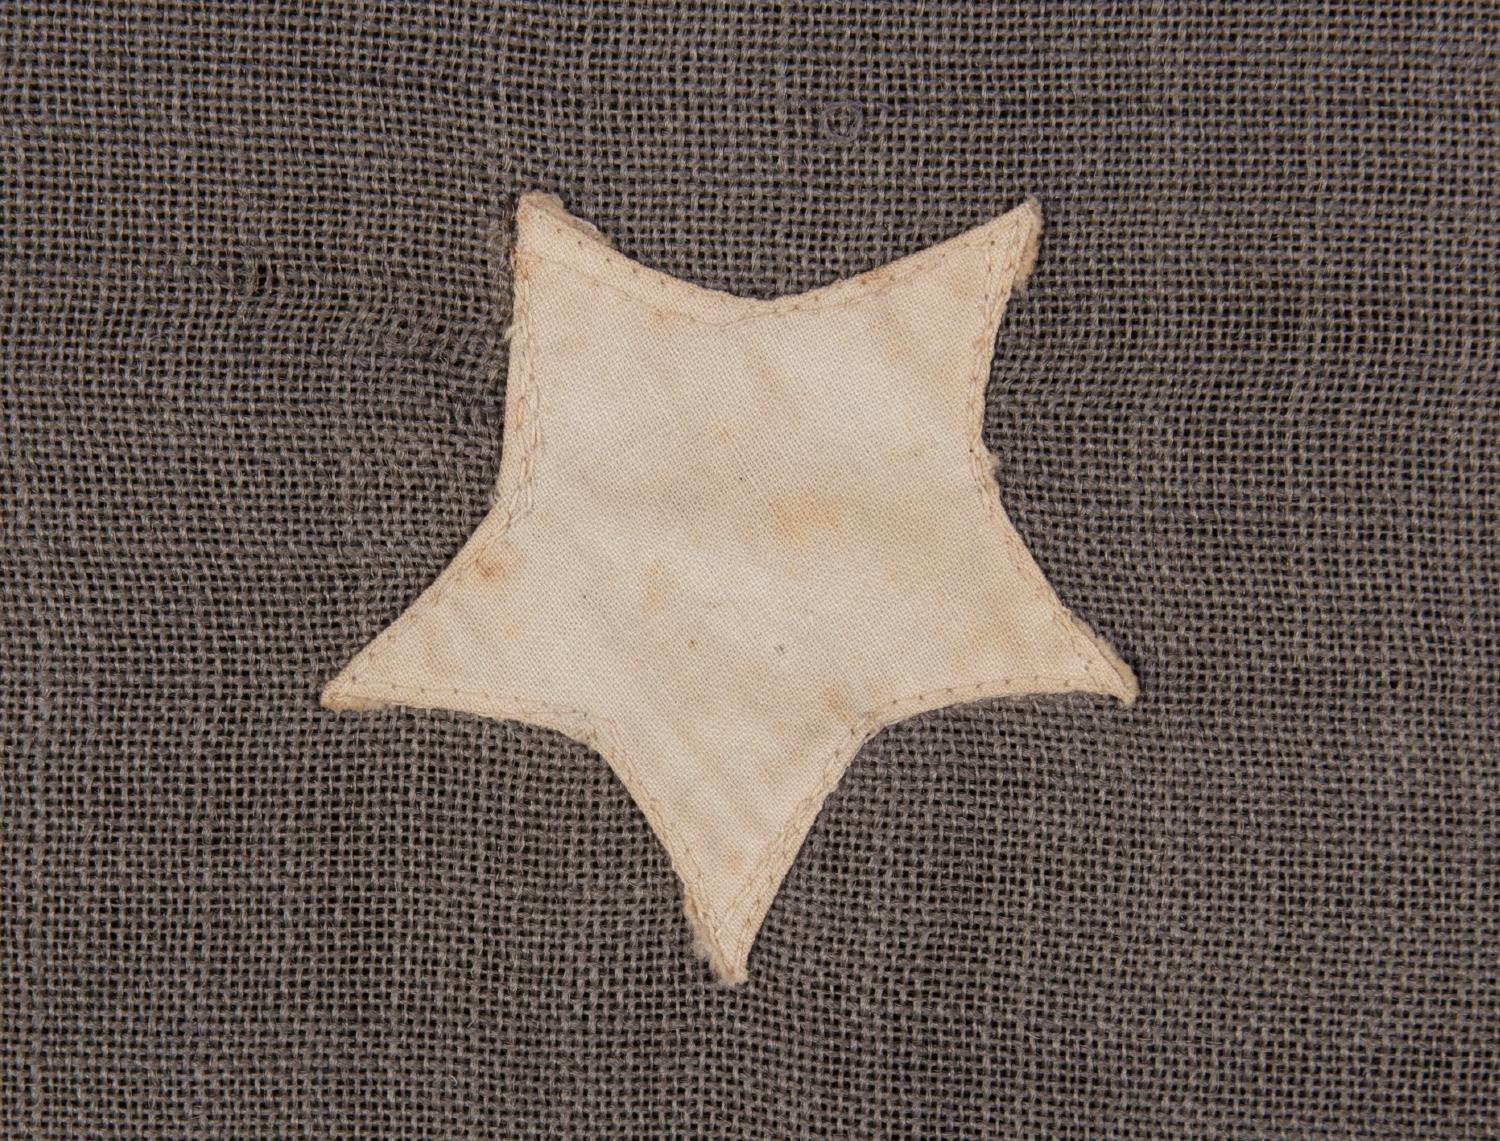 19th Century 13 Stars in a 4-5-4 Pattern on a Dusty Blue-Grey Canton, ca 1890-1895